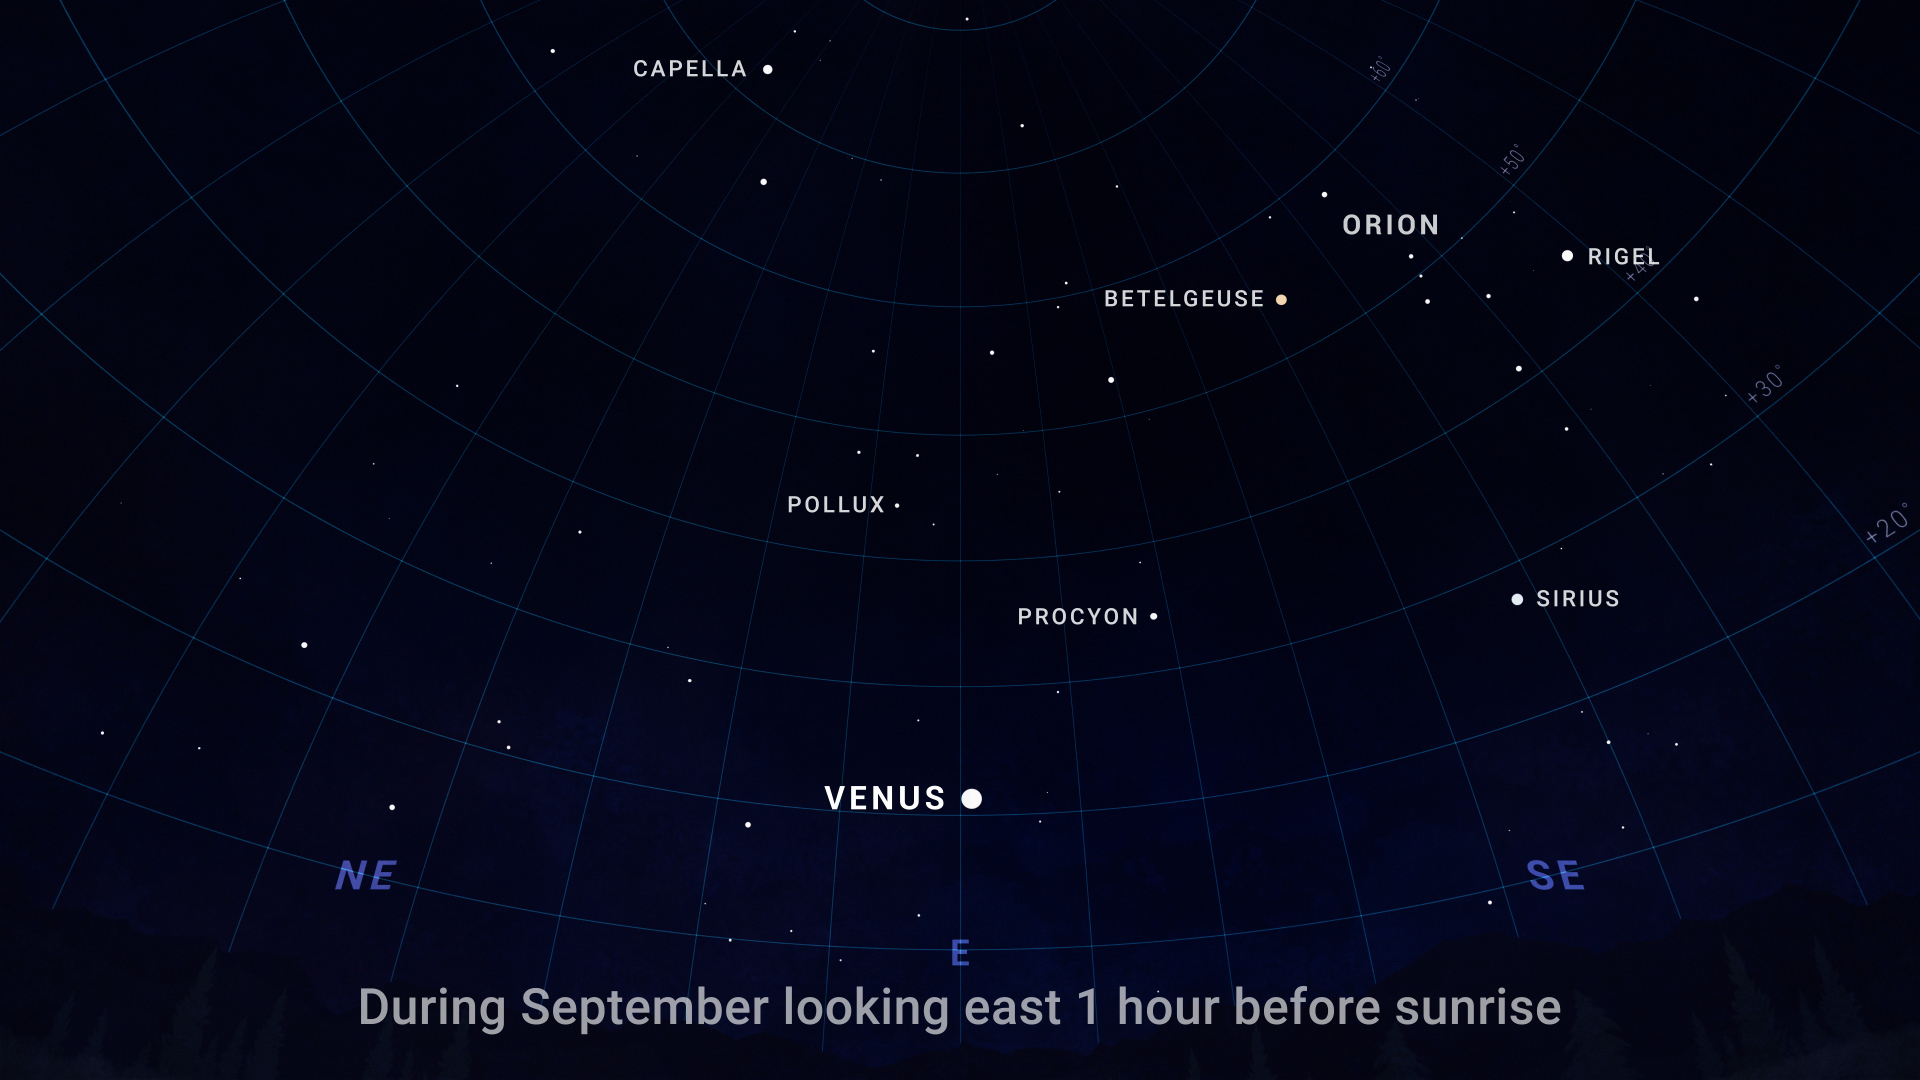 An illustrated sky chart shows the pre-dawn sky facing east, one hour before sunrise in September. The planet Venus is a bright white dot below center. Several other bright stars are labeled on the sky as well.